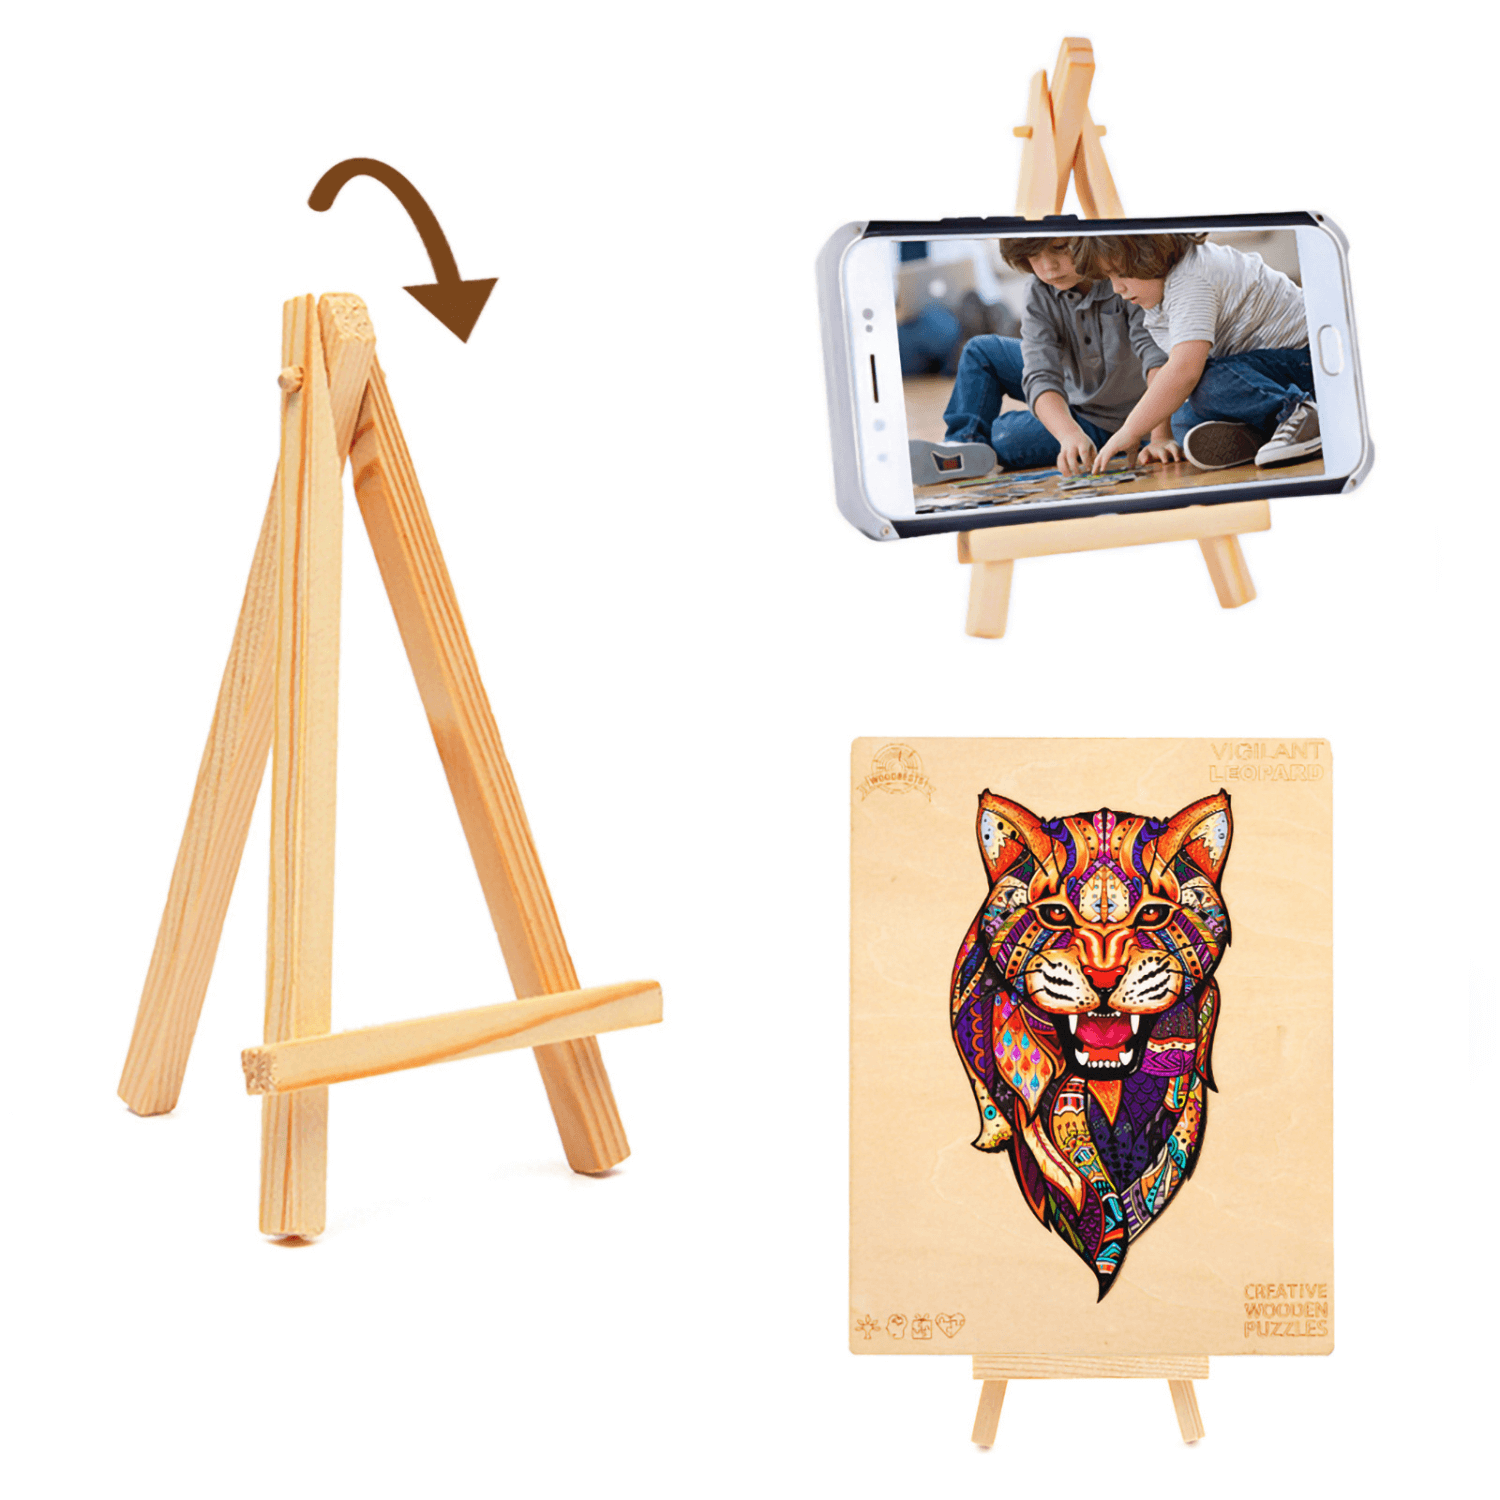 Watchful Leopard | Magic Wooden Puzzle-MagicHolz--